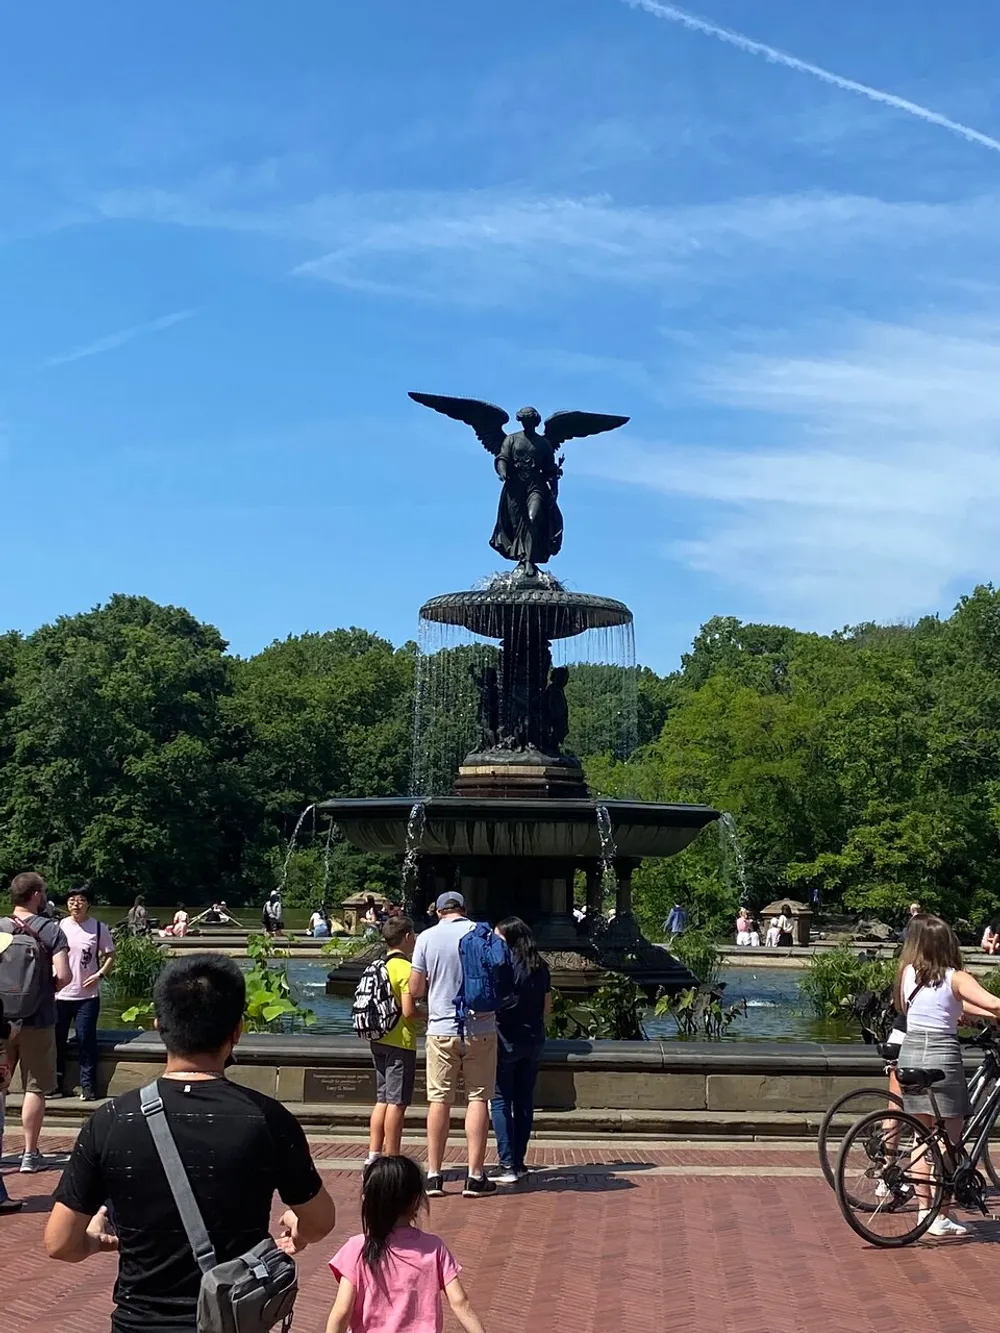 Tourists and locals alike enjoy a sunny day around a large ornate fountain with an angel statue at the center likely in a public park